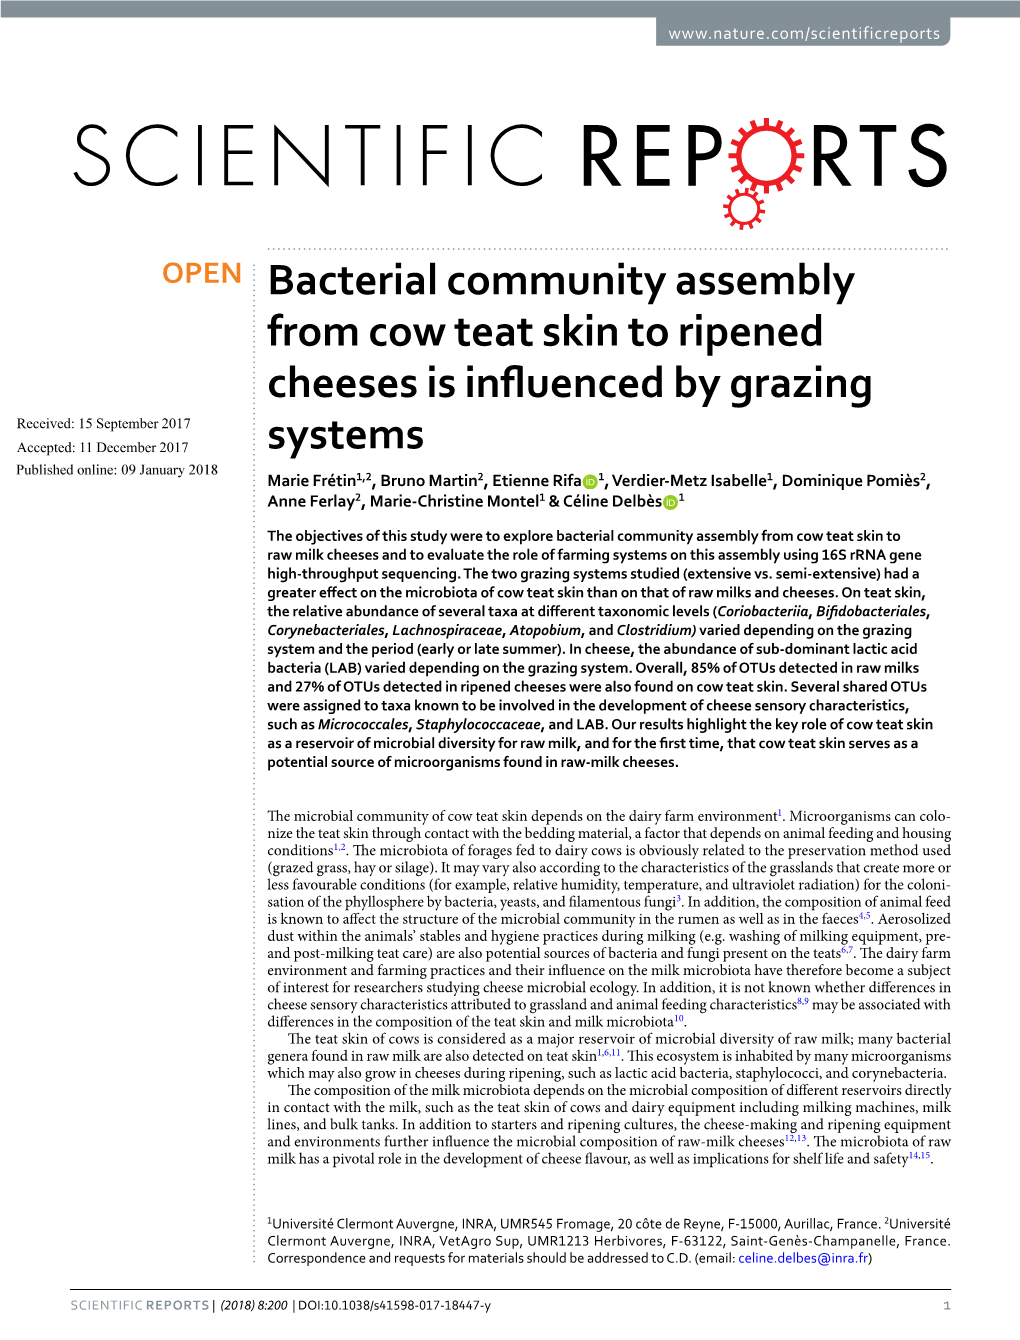 Bacterial Community Assembly from Cow Teat Skin to Ripened Cheeses Is